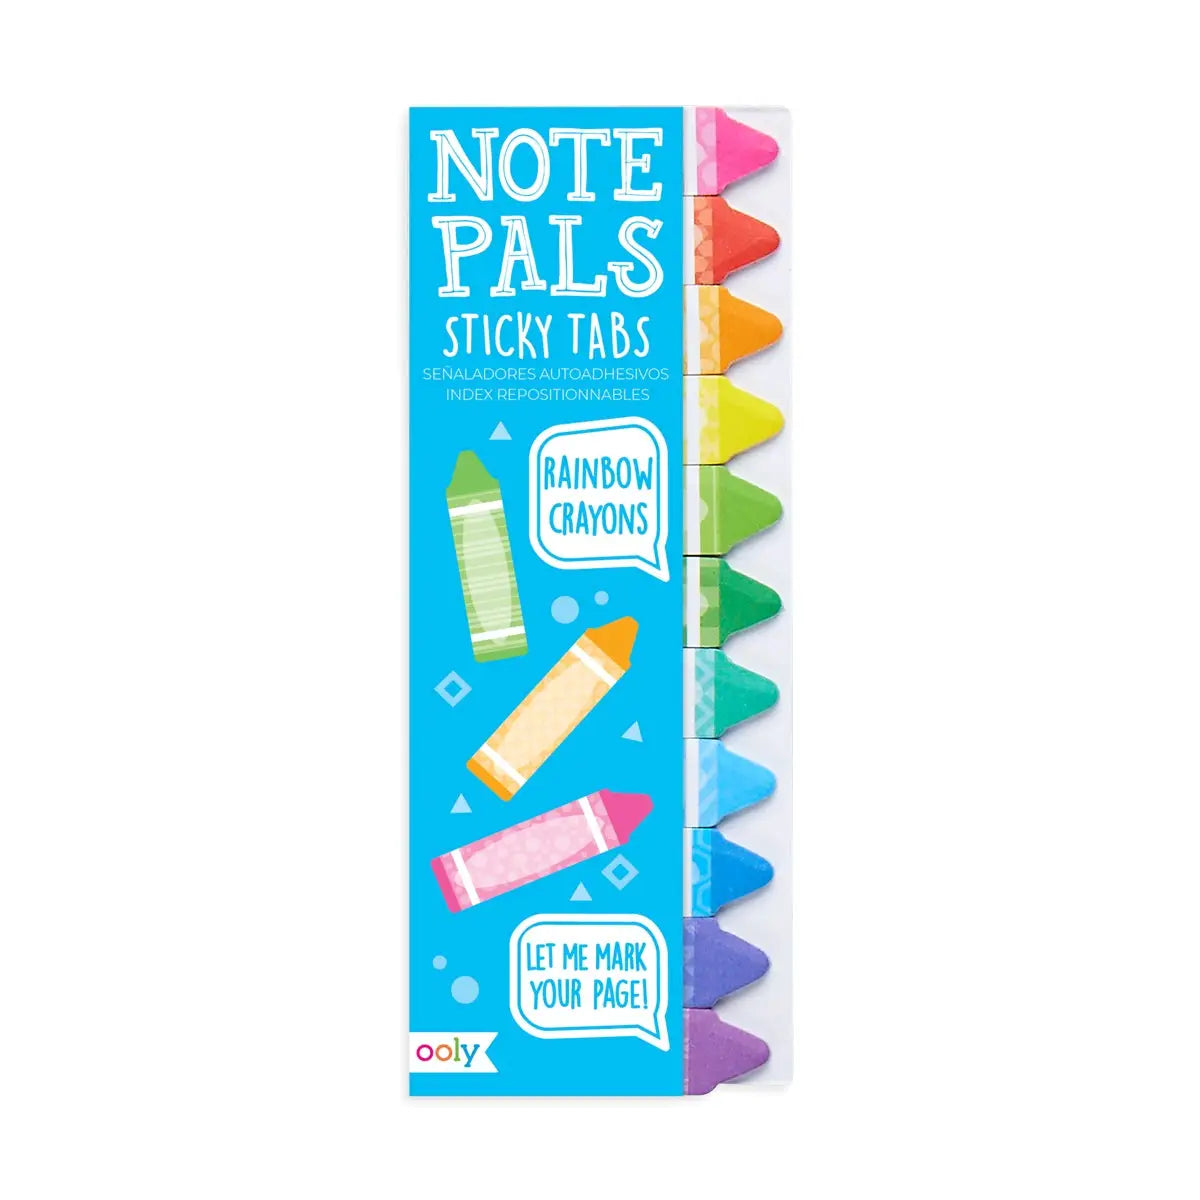 Note Pals Sticky Tabs - Rainbow Crayons